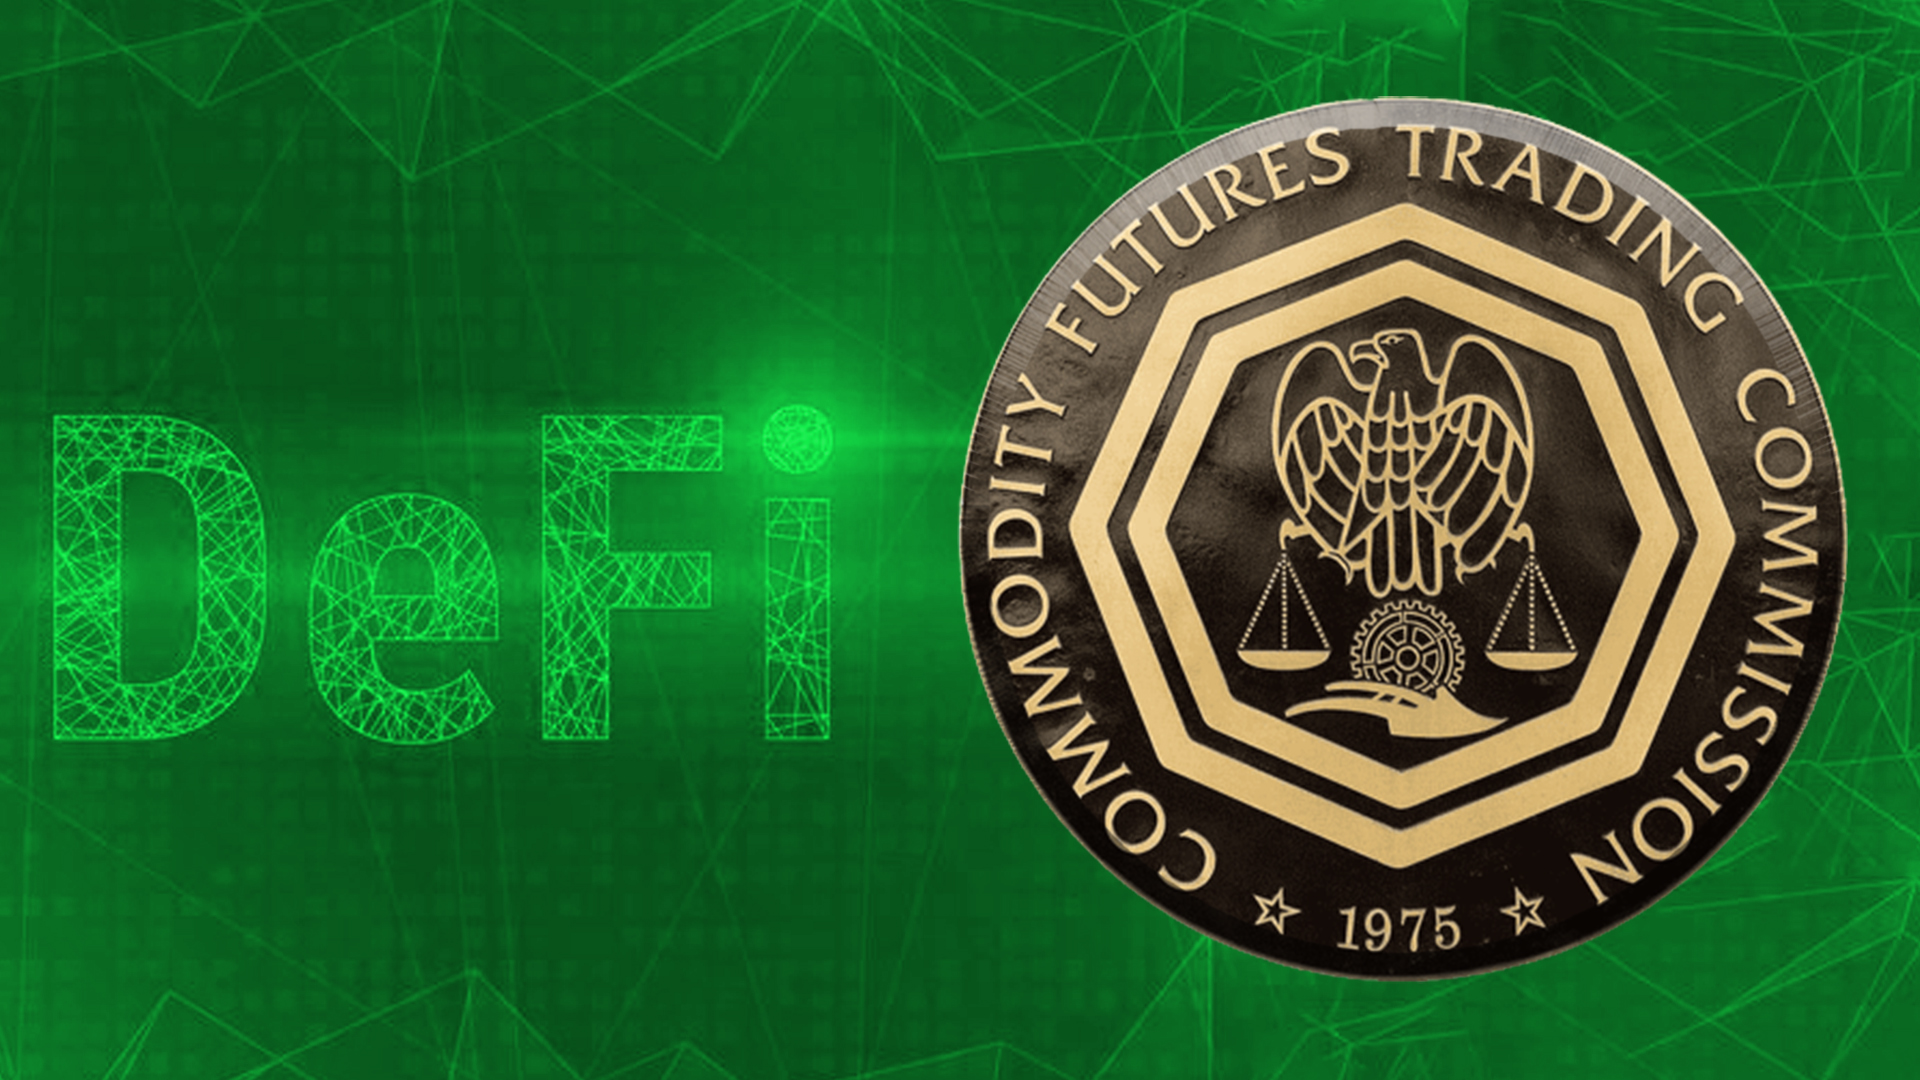 CFTC Cracks Down On DeFi Firms Over Crypto Derivatives Trading